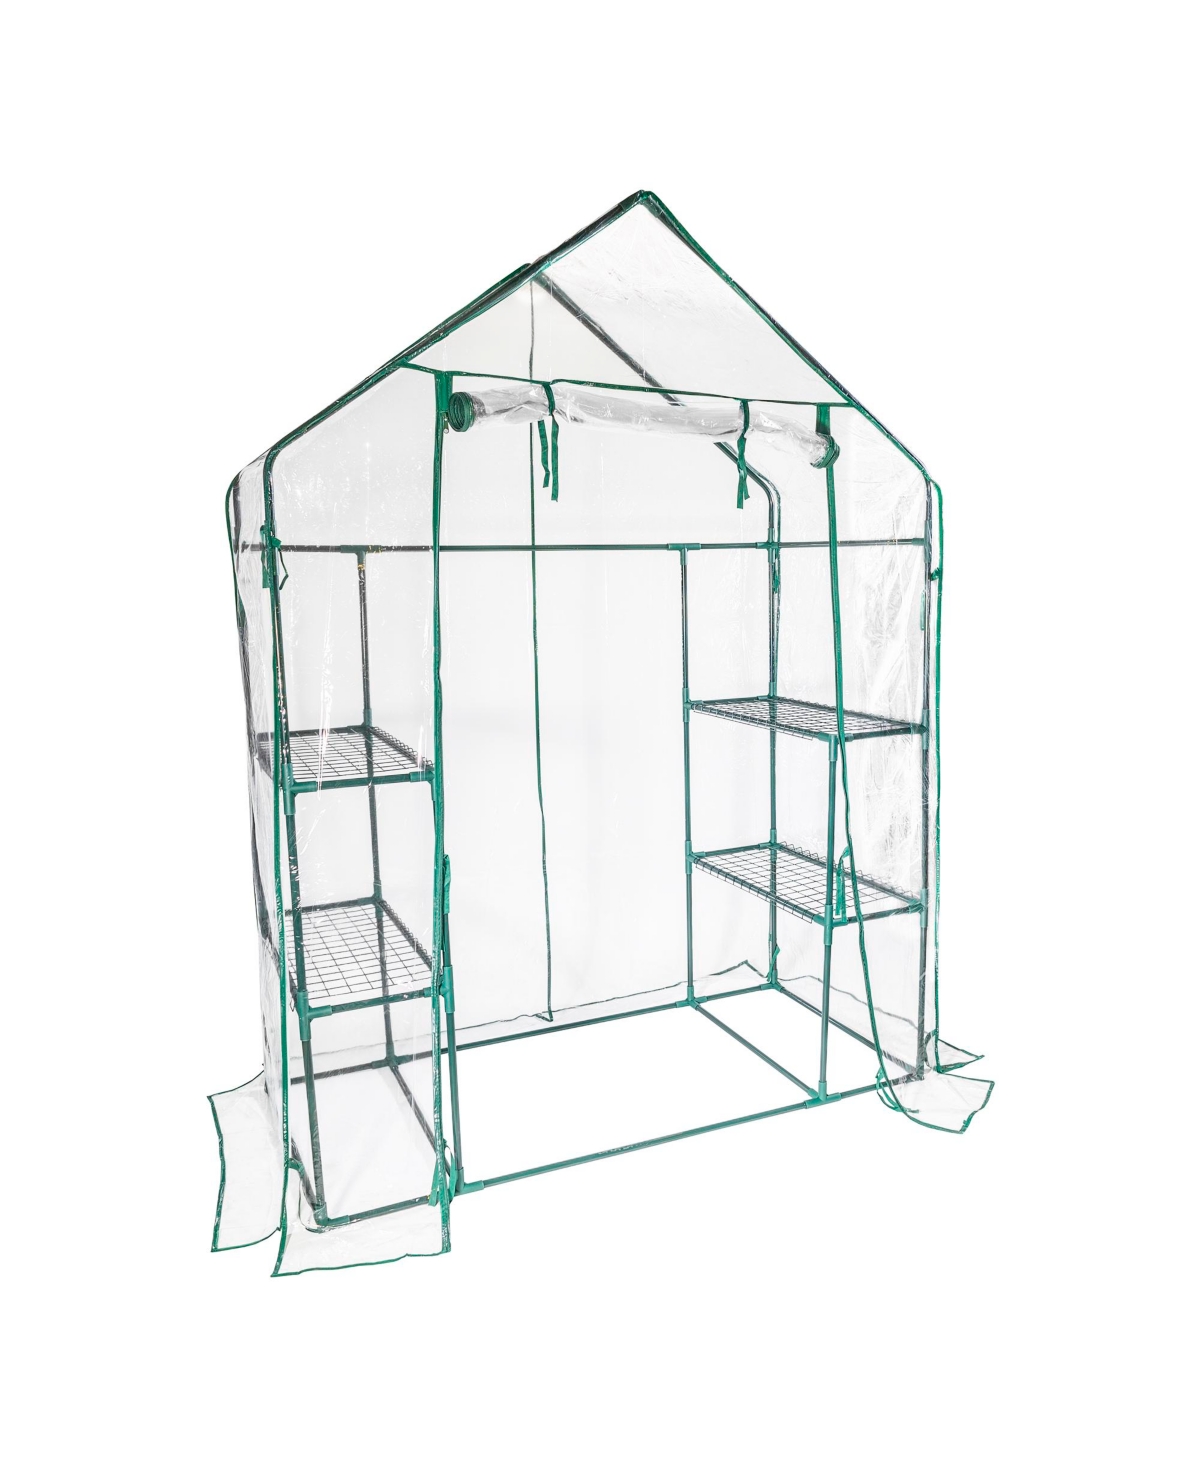 Personal Plastic Indoor Outdoor Standing Greenhouse For Seed Starting and Propagation, Frost Protection Clear, Medium, 56 Inches x 29